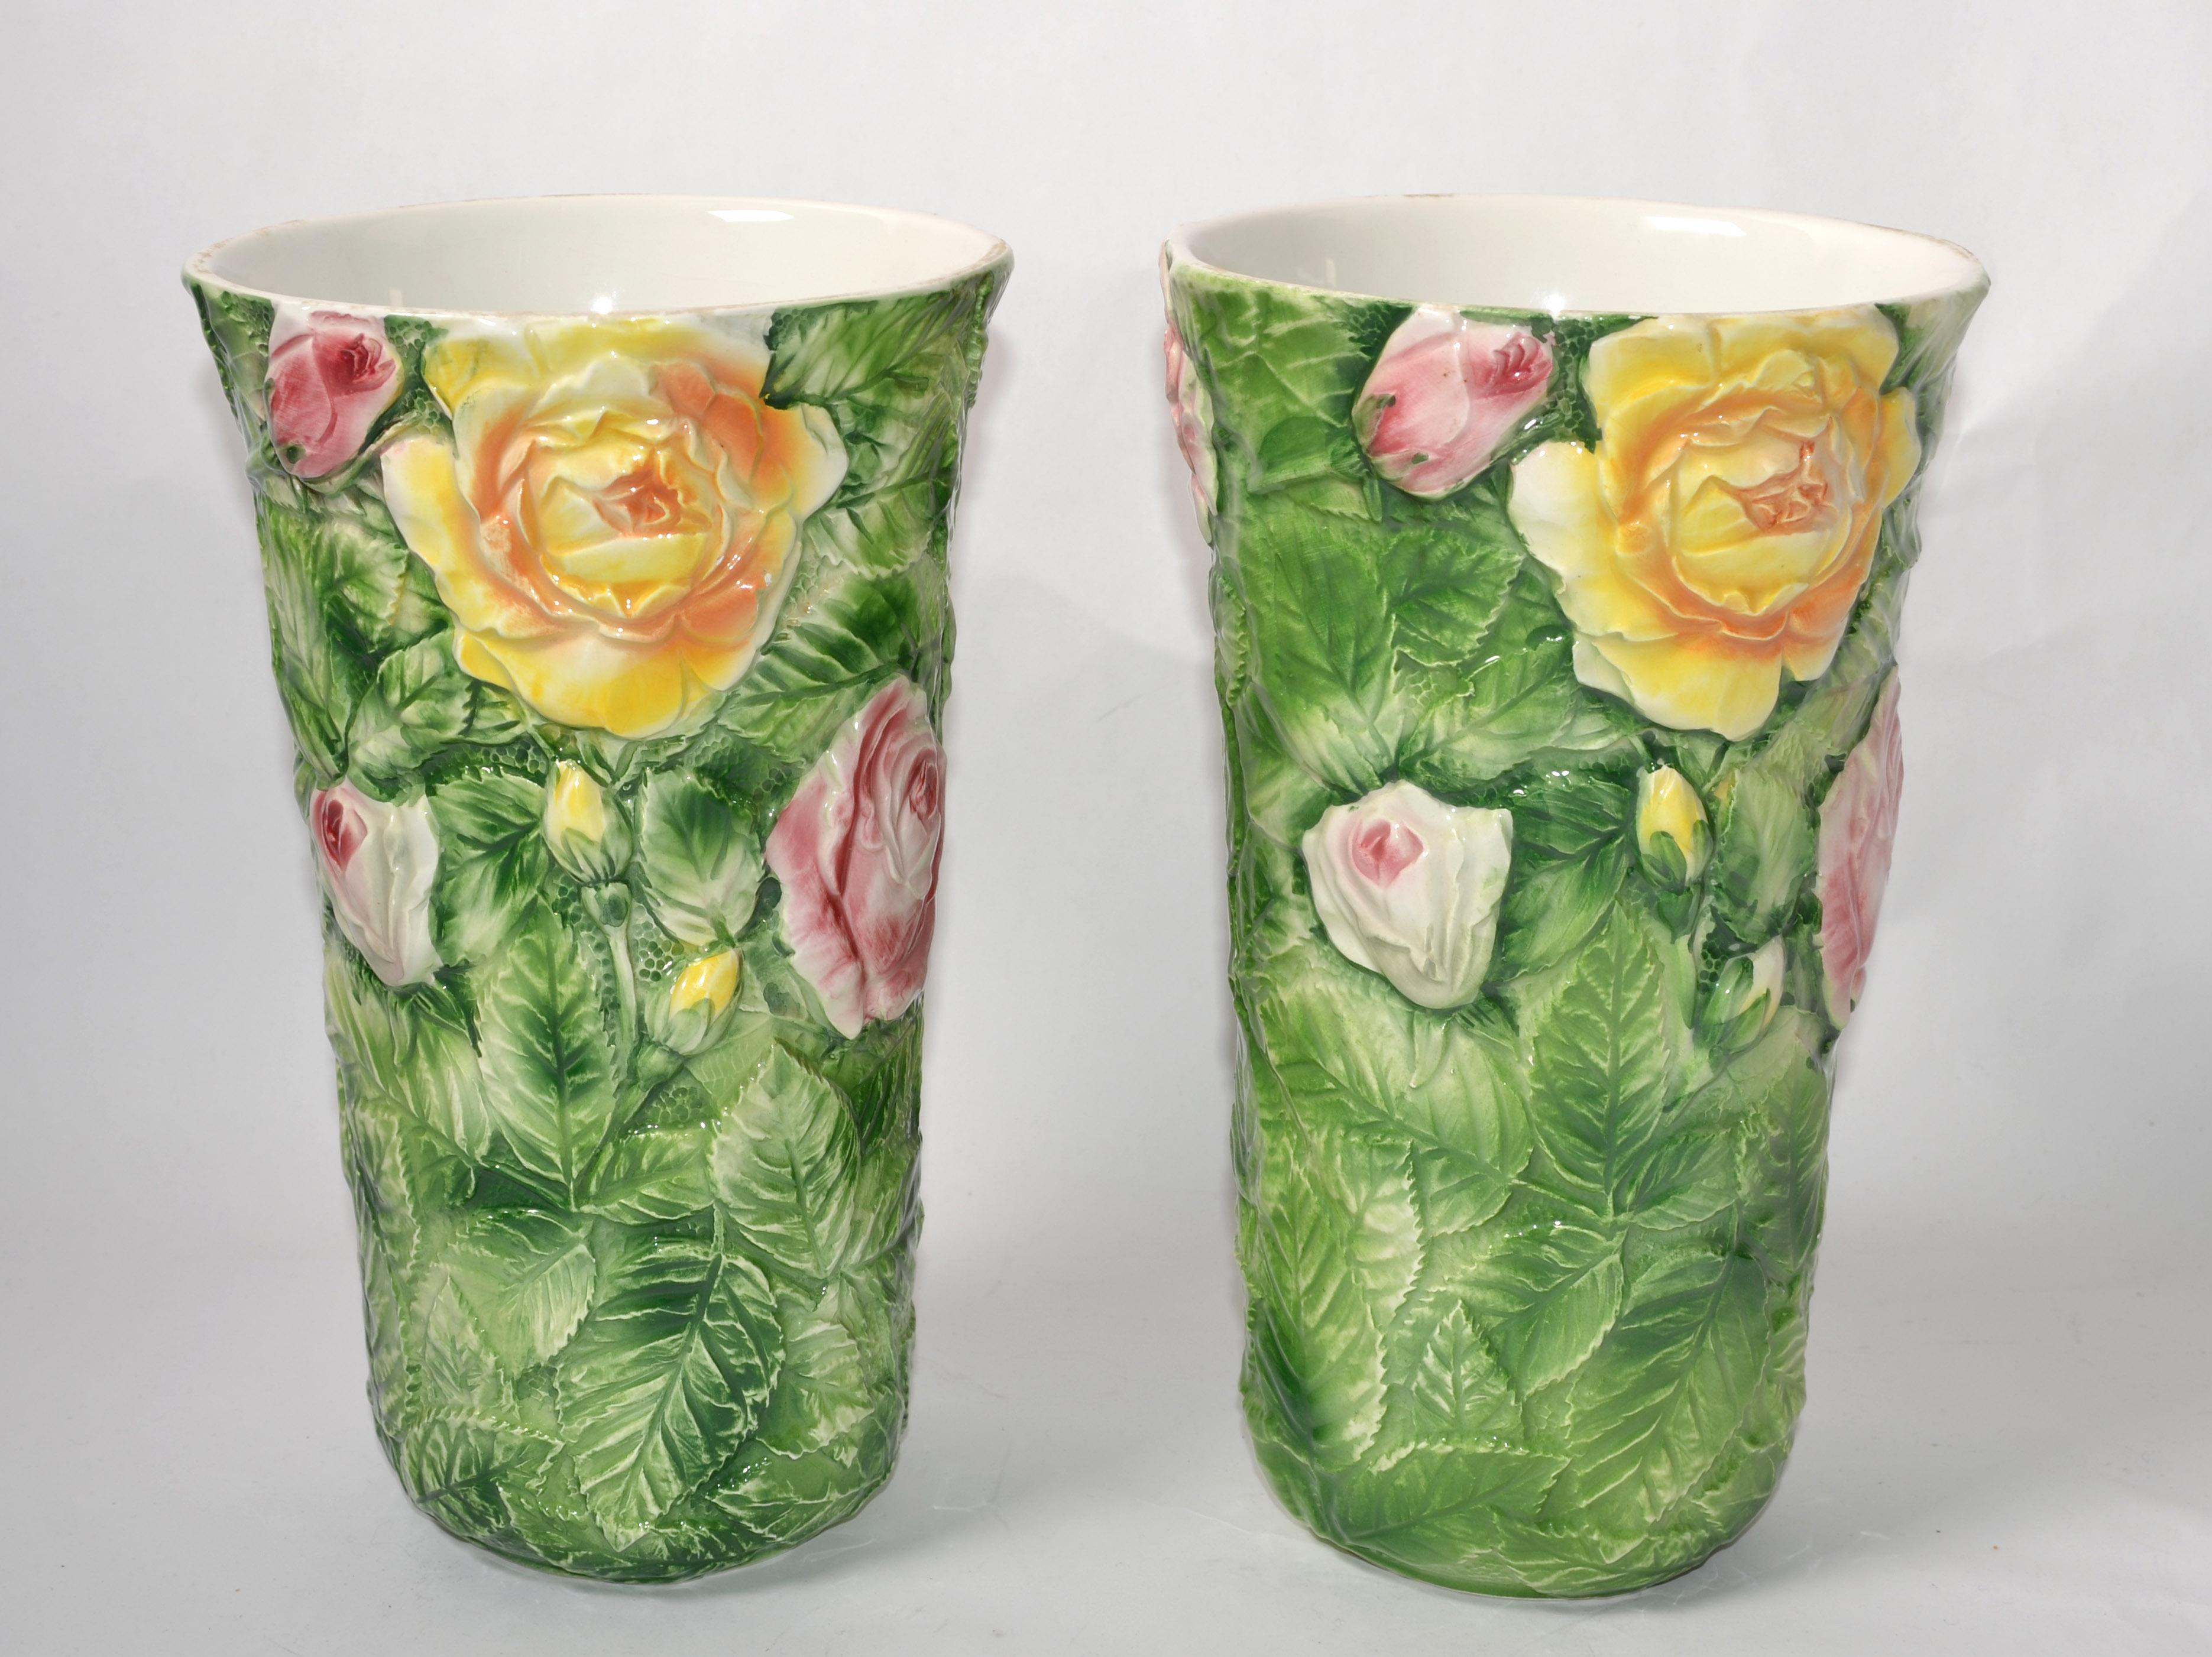 Charming Set of Vintage Floral 3D Italian Majolica Vases in the Style of Delphin Massier, Vallauris, hand-painted in Green, Pink and Yellow Colors.
Depicting Roses and the Leaves hand-carved and made out of glazed Ceramic.
Marked at the Base,